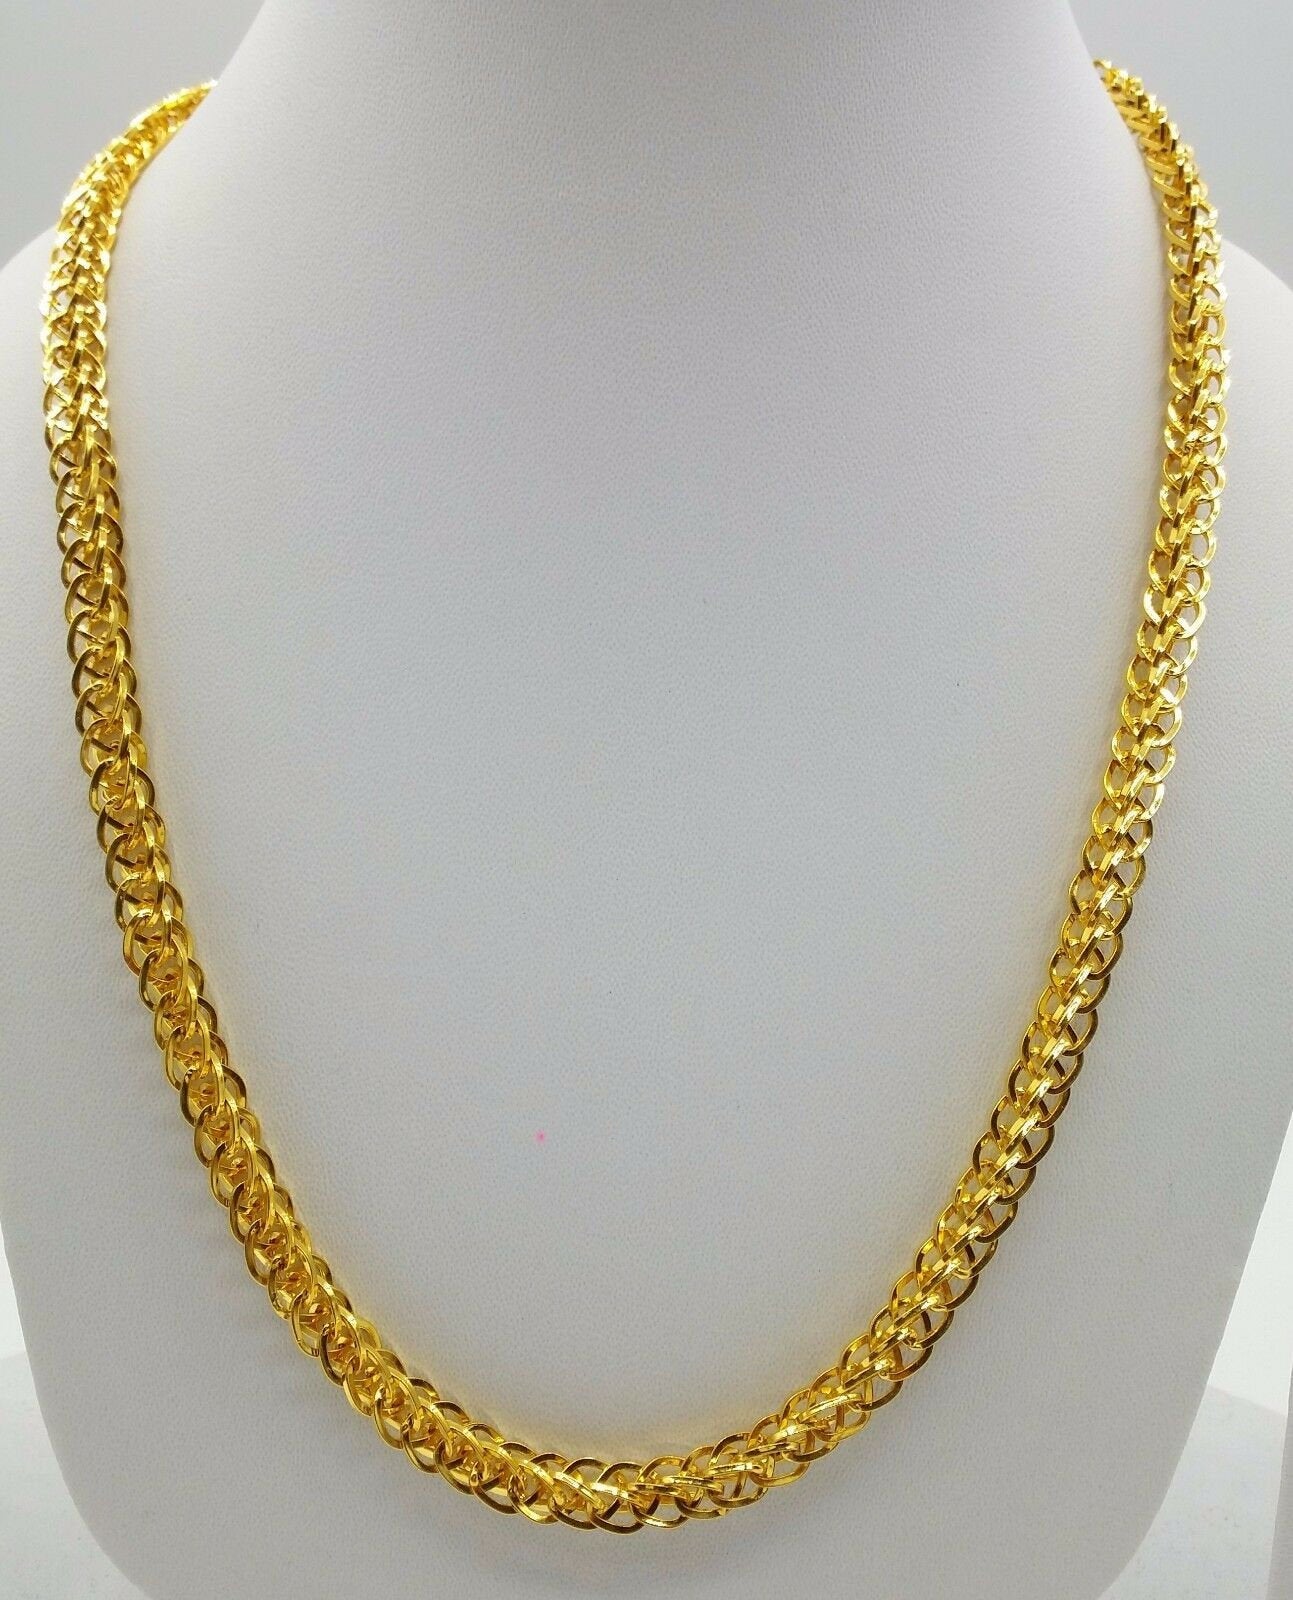 Handmade 22 karat Vintage style 20 inches long fabulous foxtail link chain necklace for unisex jewelry from rajastjan - TRIBAL ORNAMENTS